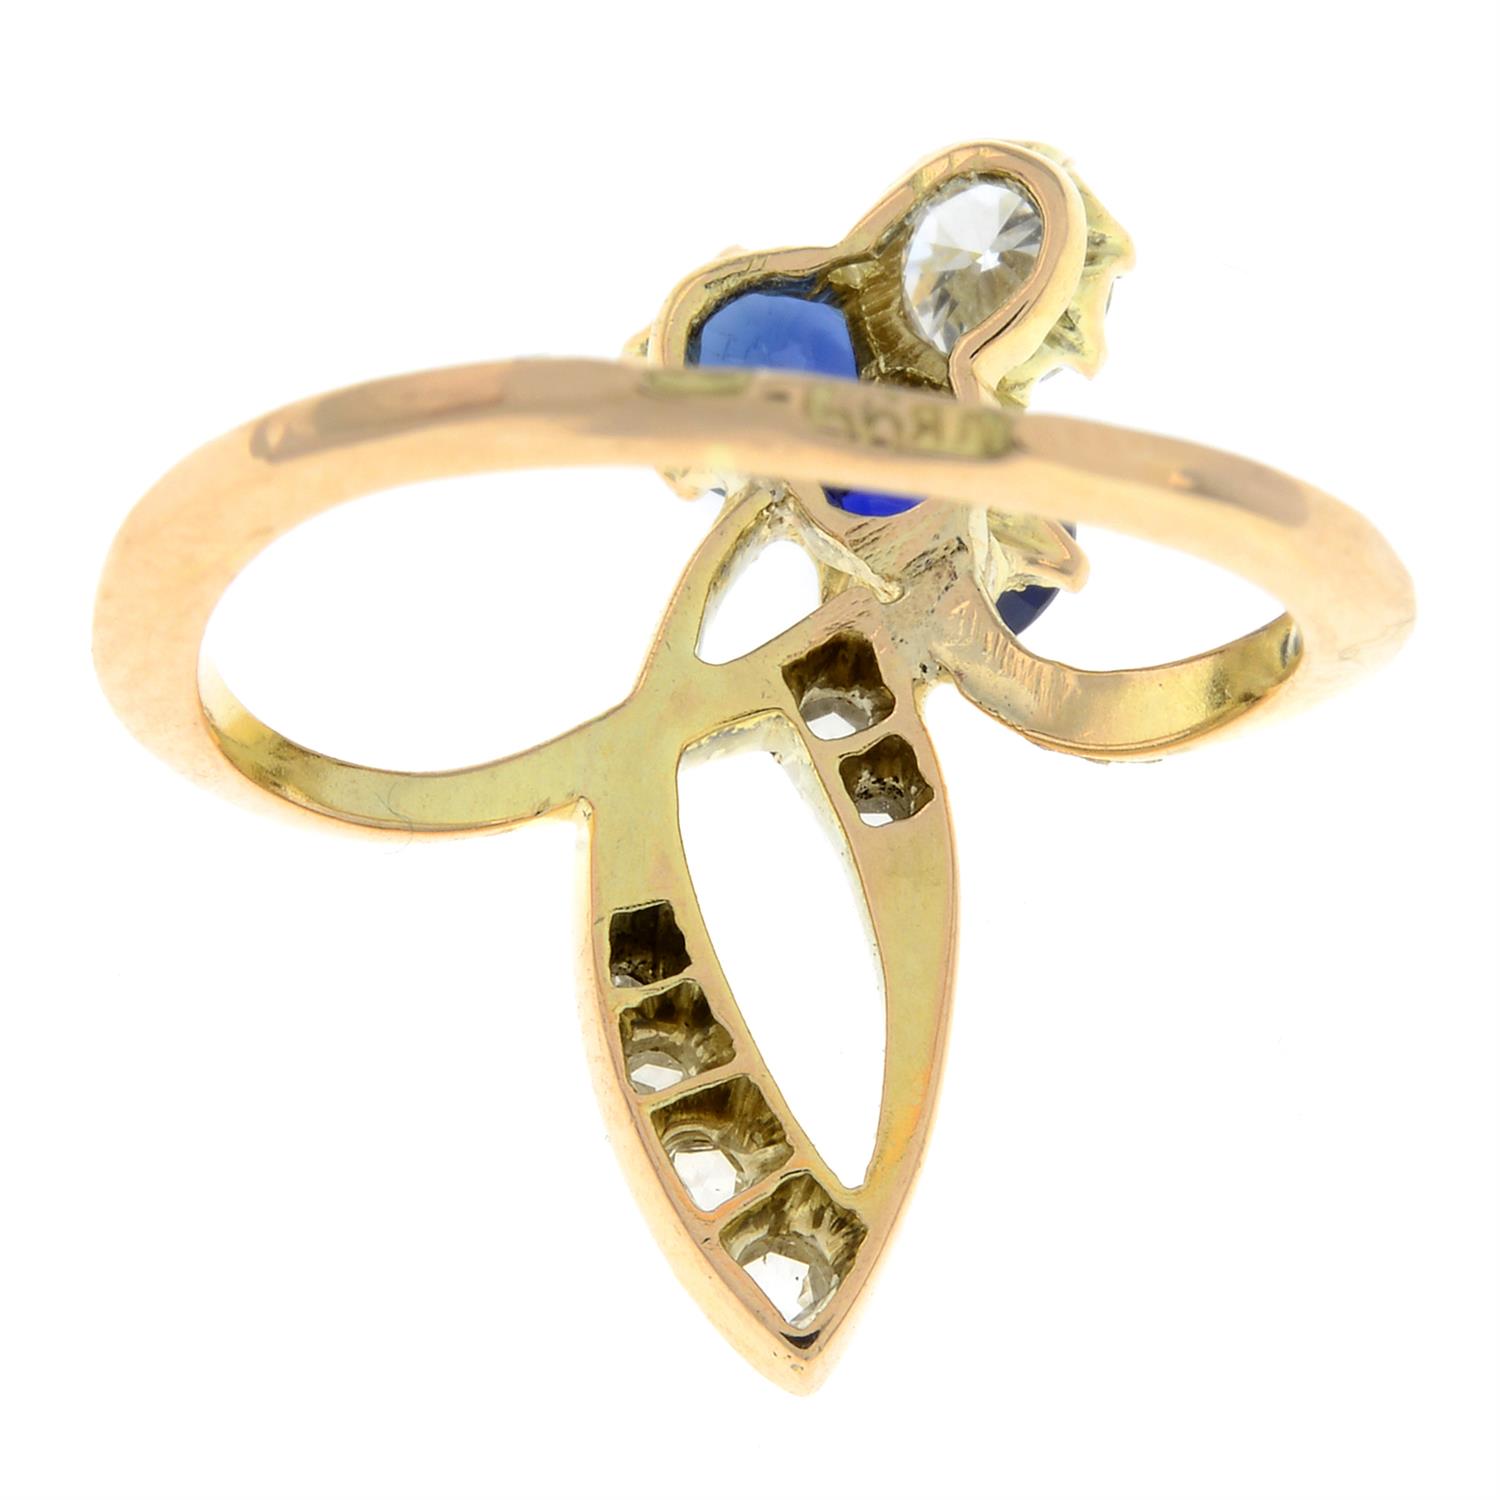 Russian Art Nouveau gold diamond and sapphire ring - Image 3 of 5